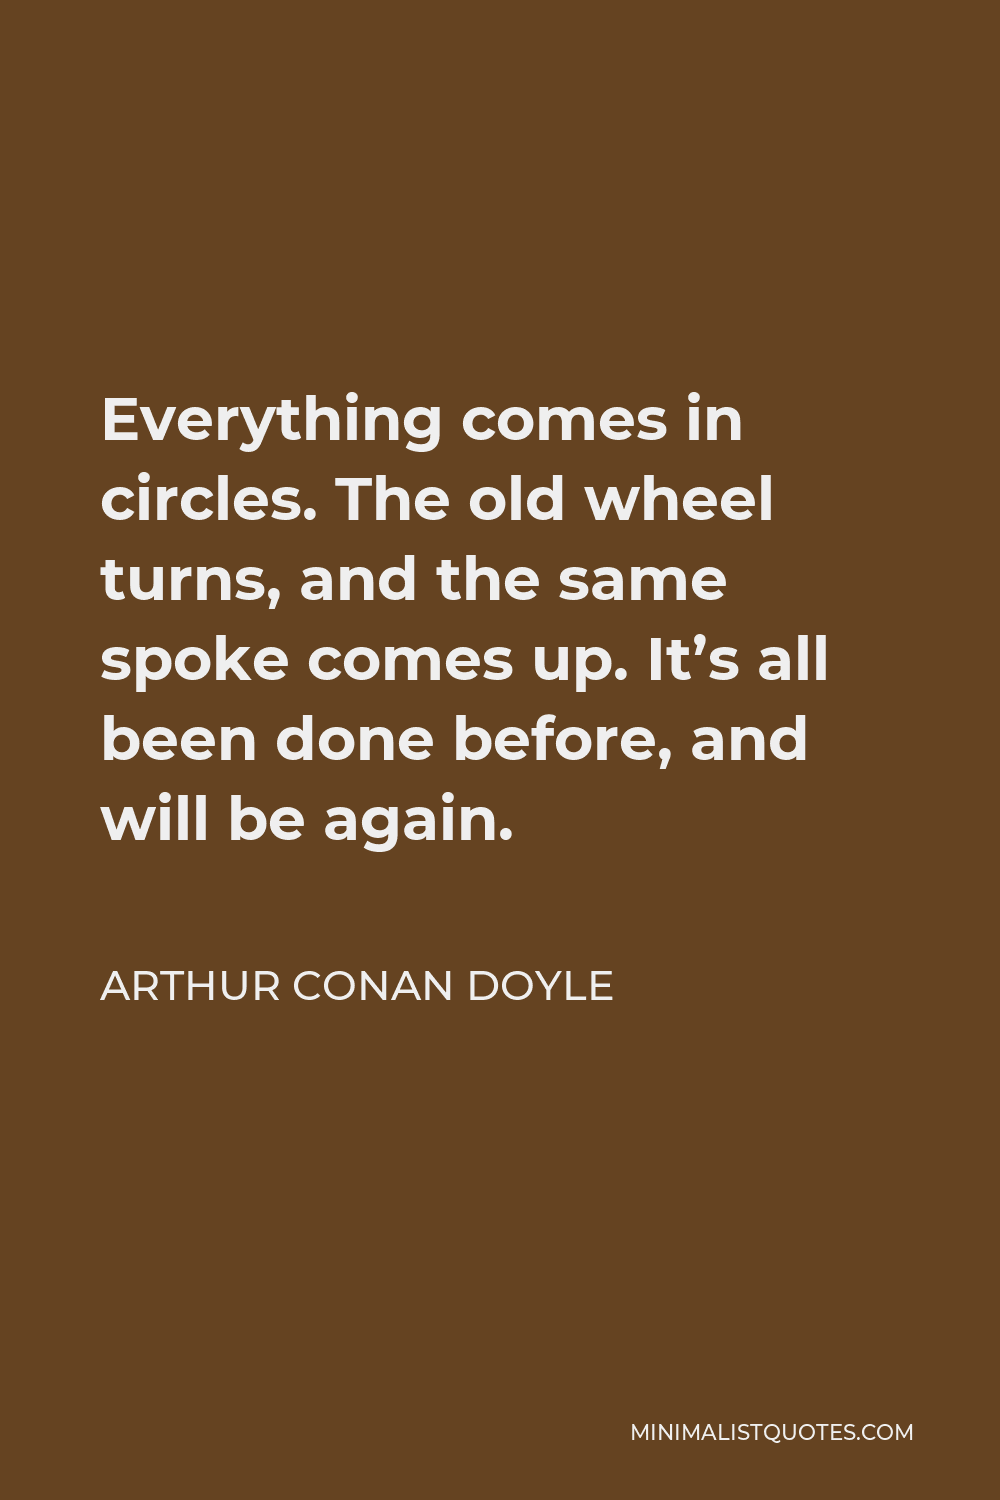 Arthur Conan Doyle Quote - Everything comes in circles. The old wheel turns, and the same spoke comes up. It’s all been done before, and will be again.